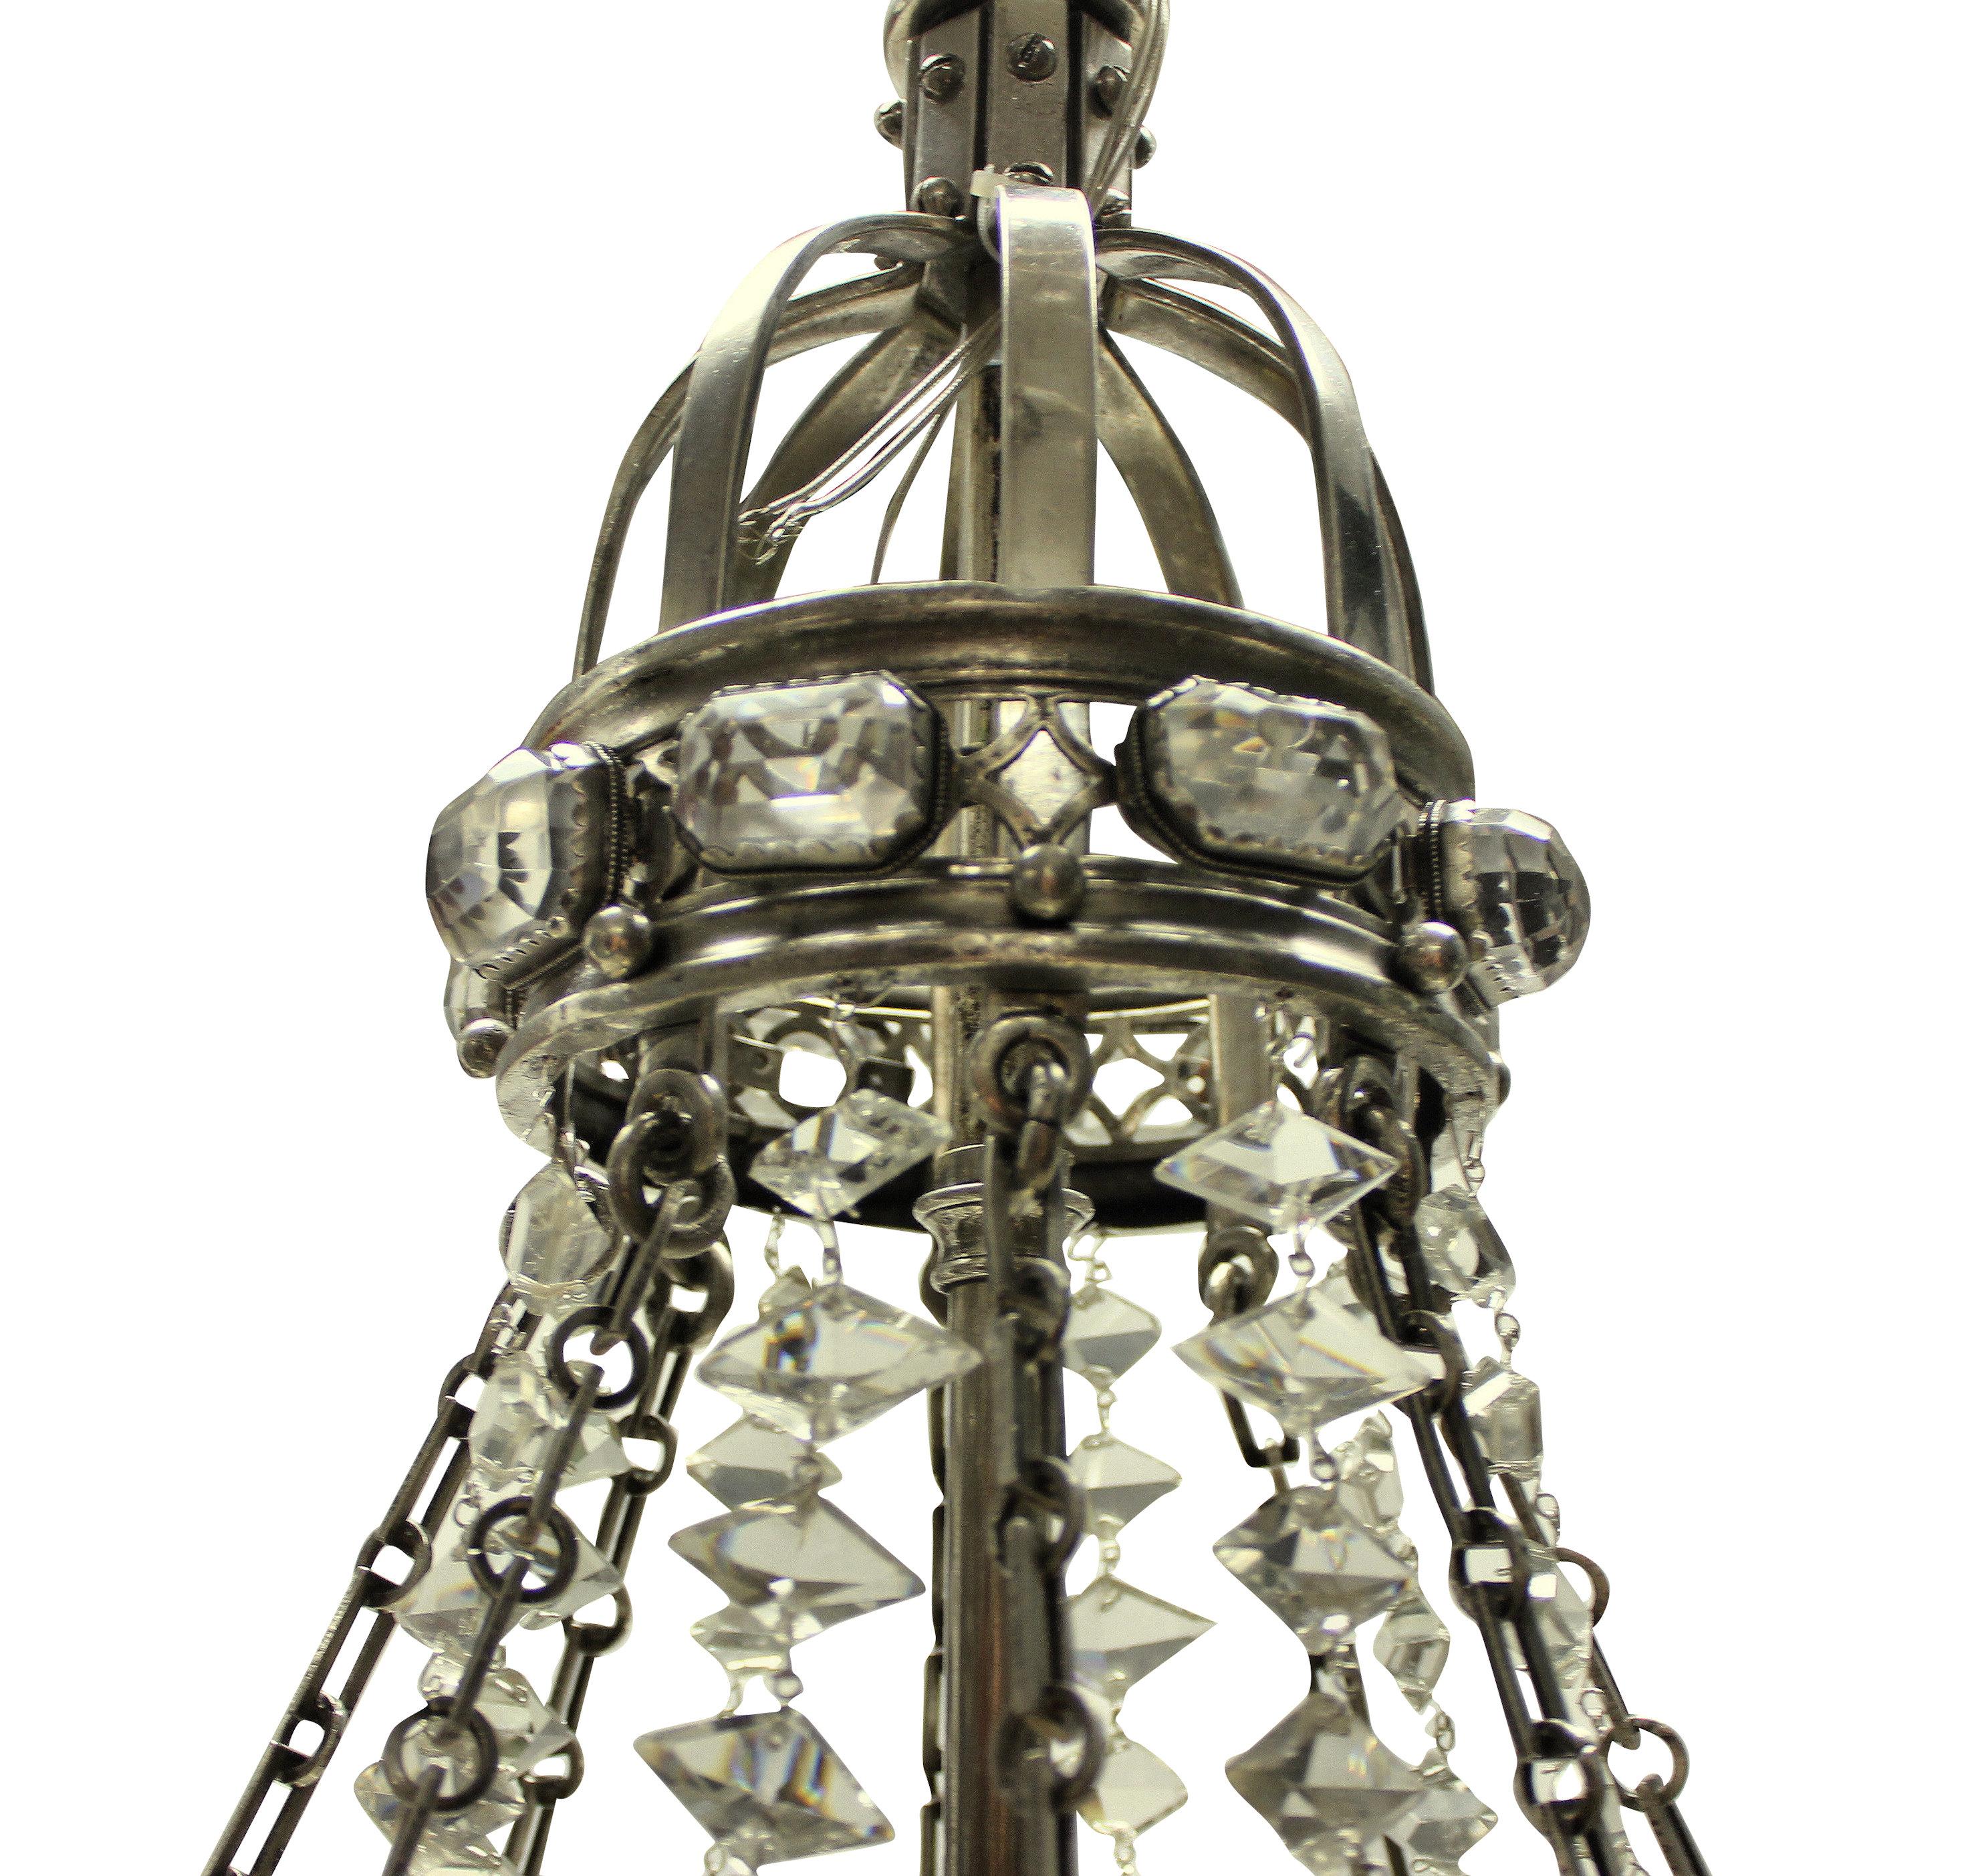 A rare and unusual English silver plated chandelier, made to celebrate the Diamond Jubilee of Queen Empress Victoria. The chandelier is fashioned to resemble elements of both her diadem and crown. The cut glass of good quality with bands of glass